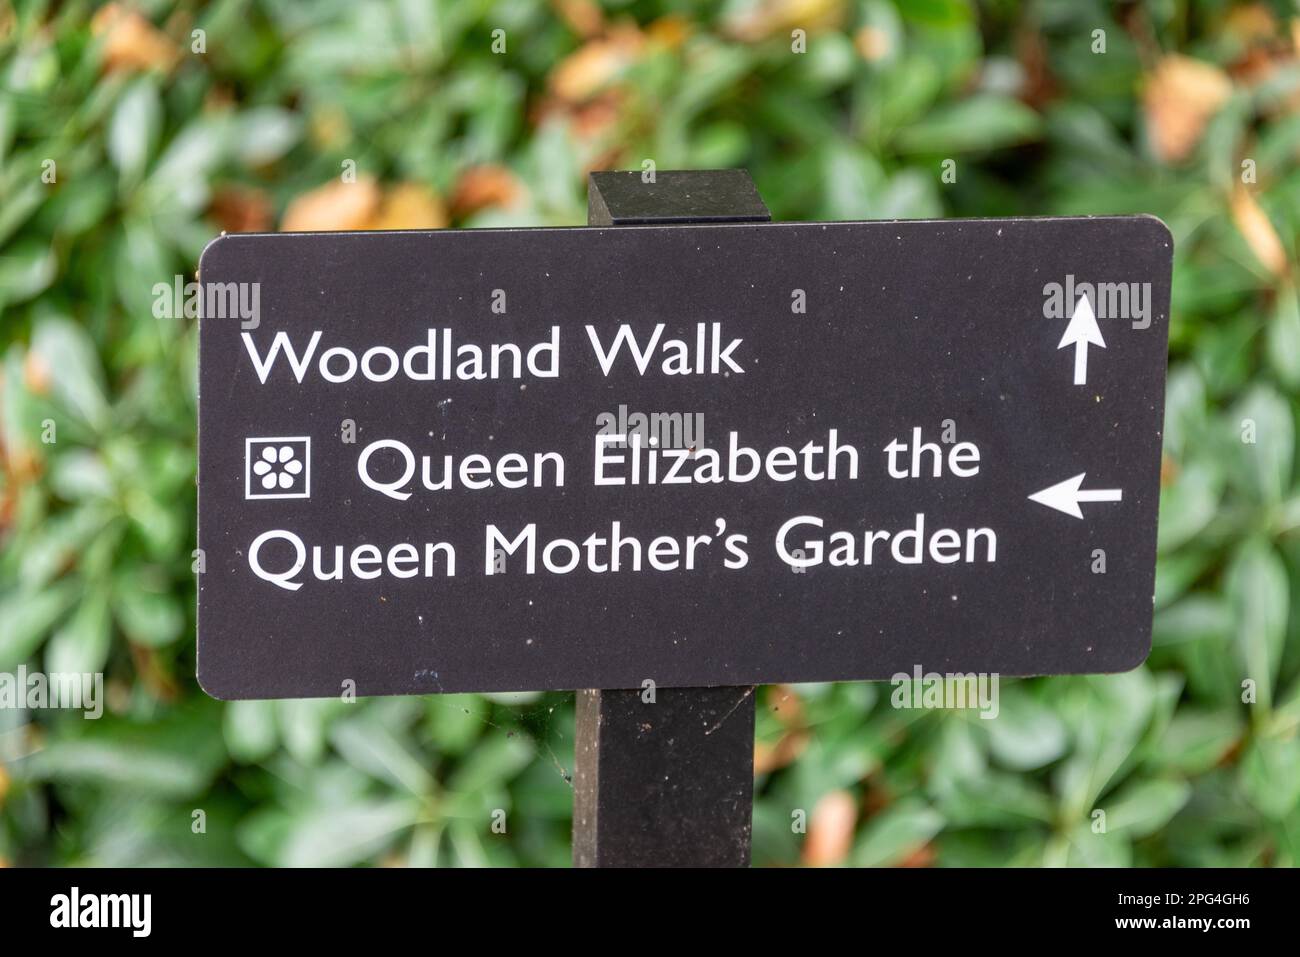 The Queen Mother's Garden within the grounds of Walmer Castle near Deal in Kent, Britain   The Queen Mother was Lord Warden for 23 years, and this con Stock Photo